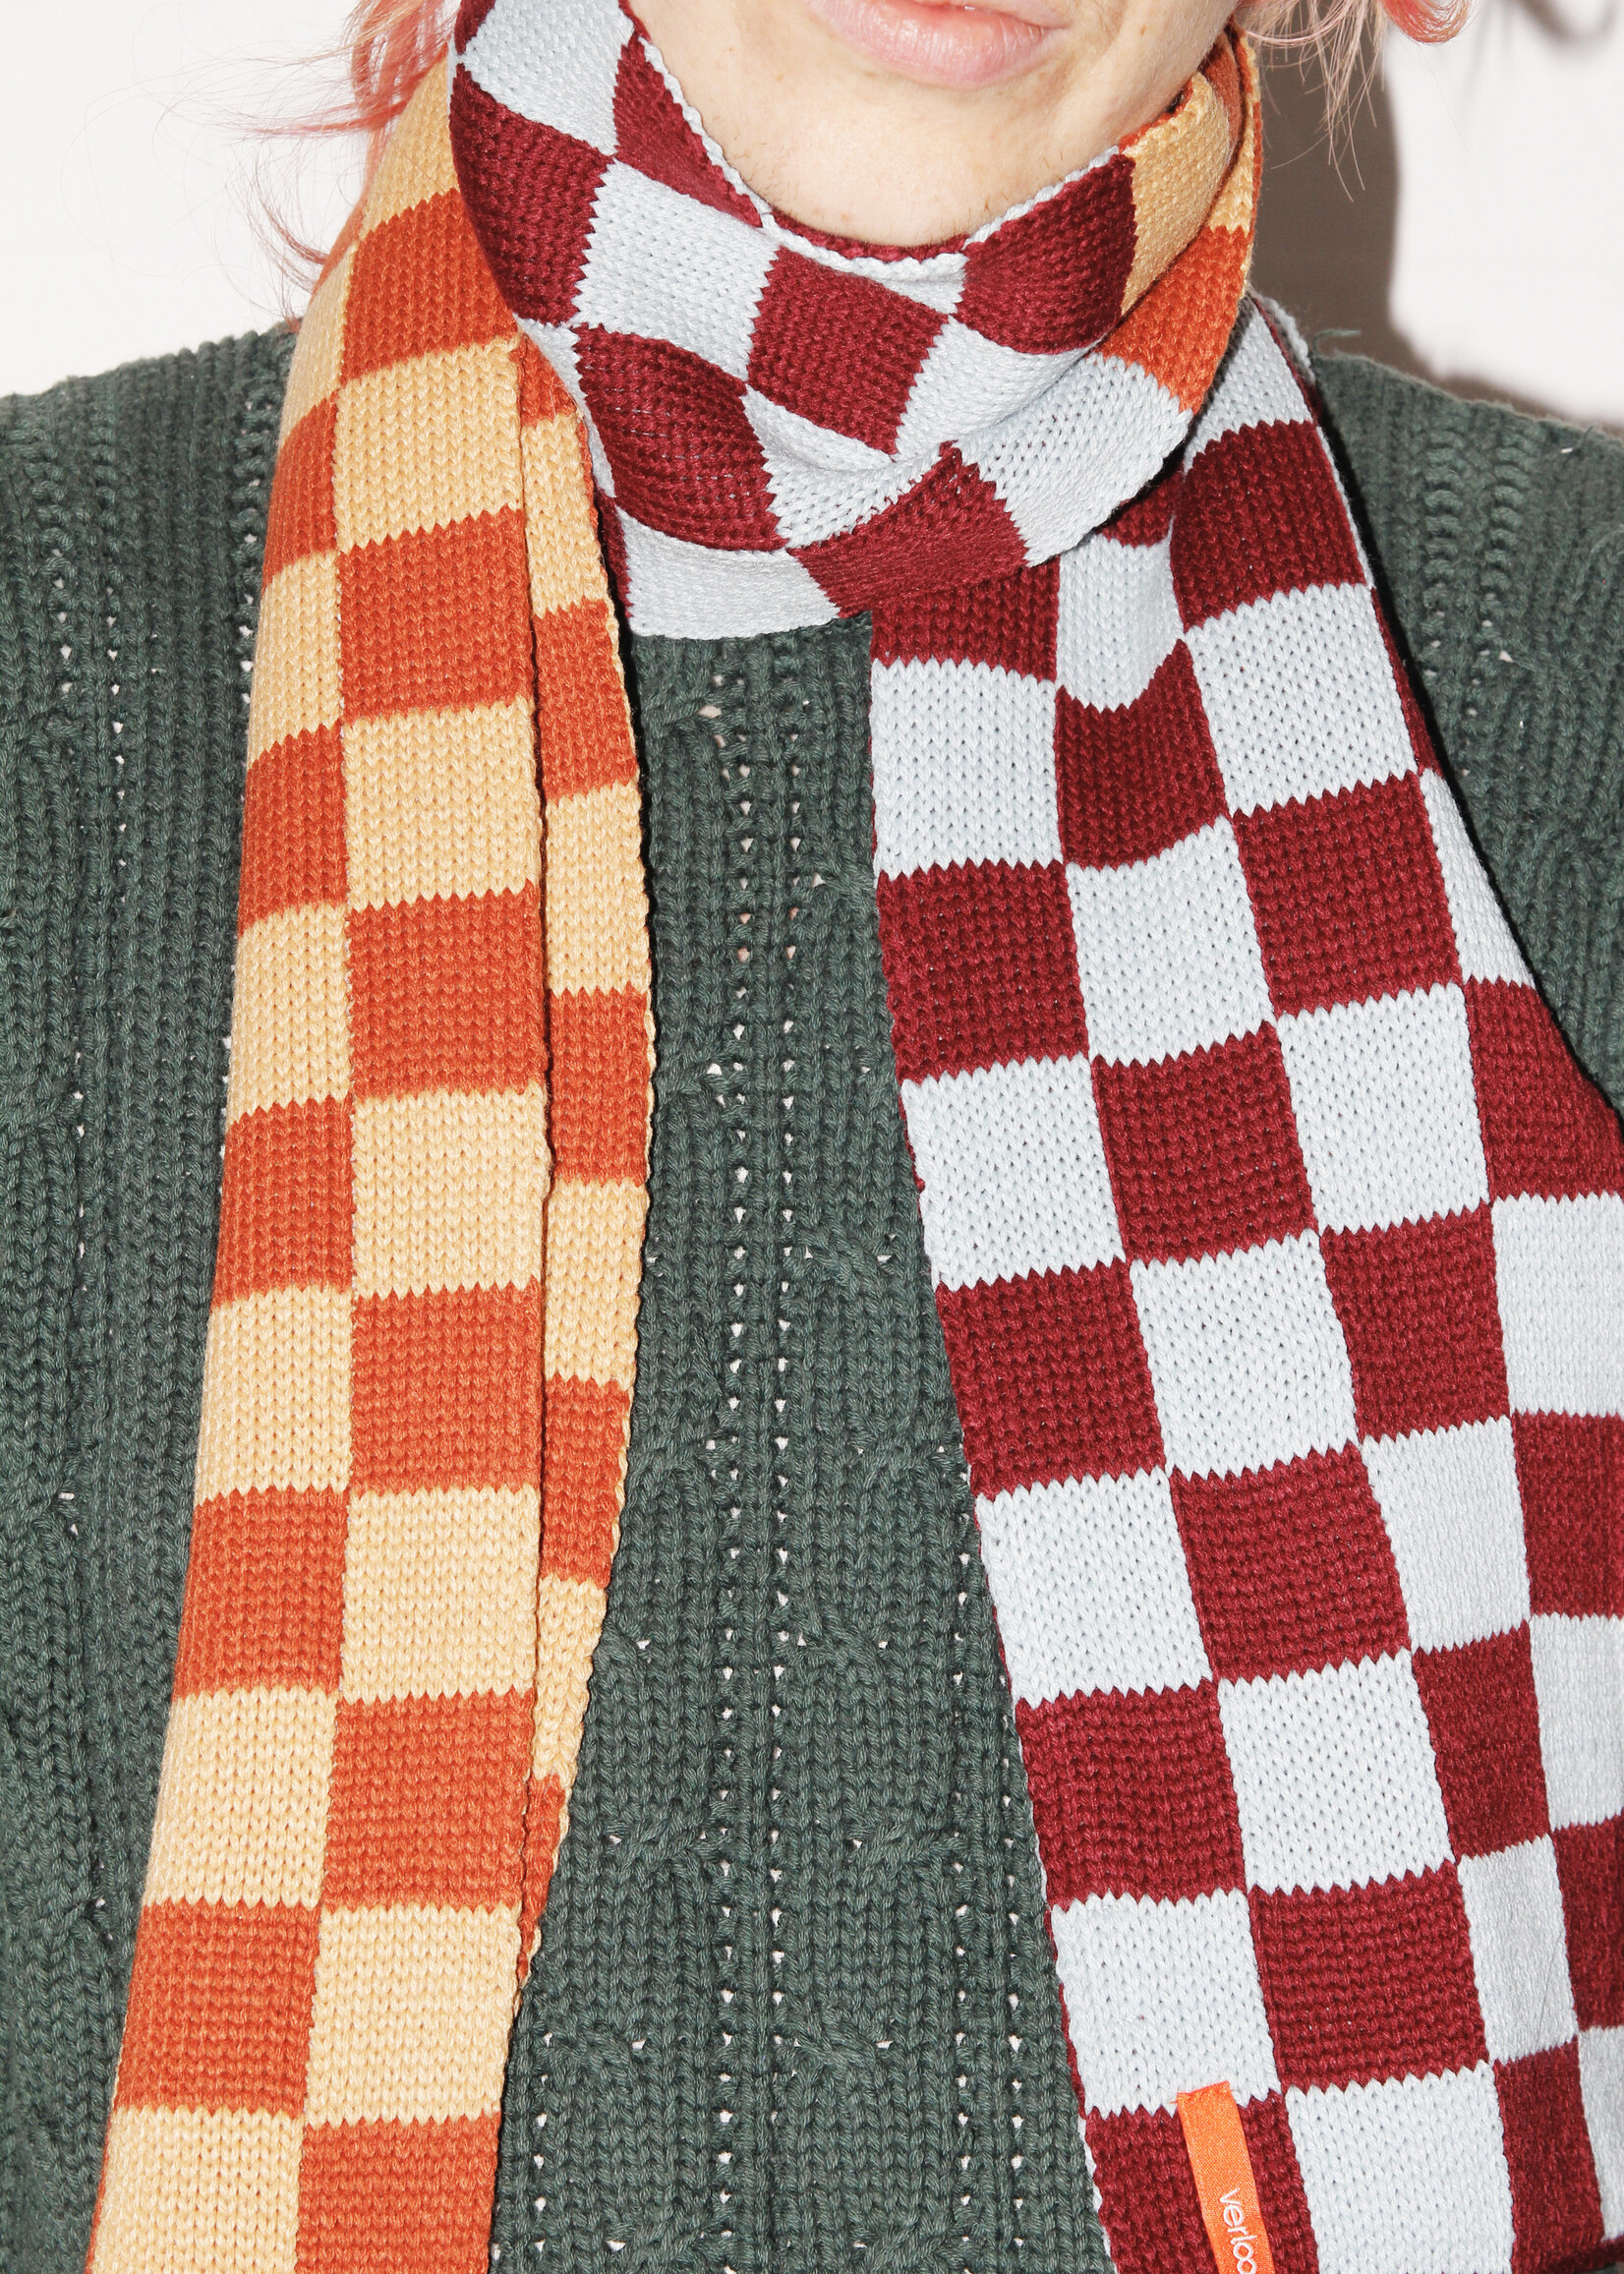 Verloop Knits Checkerboard Mini Scarf in Stone Blue and Wine Red - CITIZEN  VINTAGE